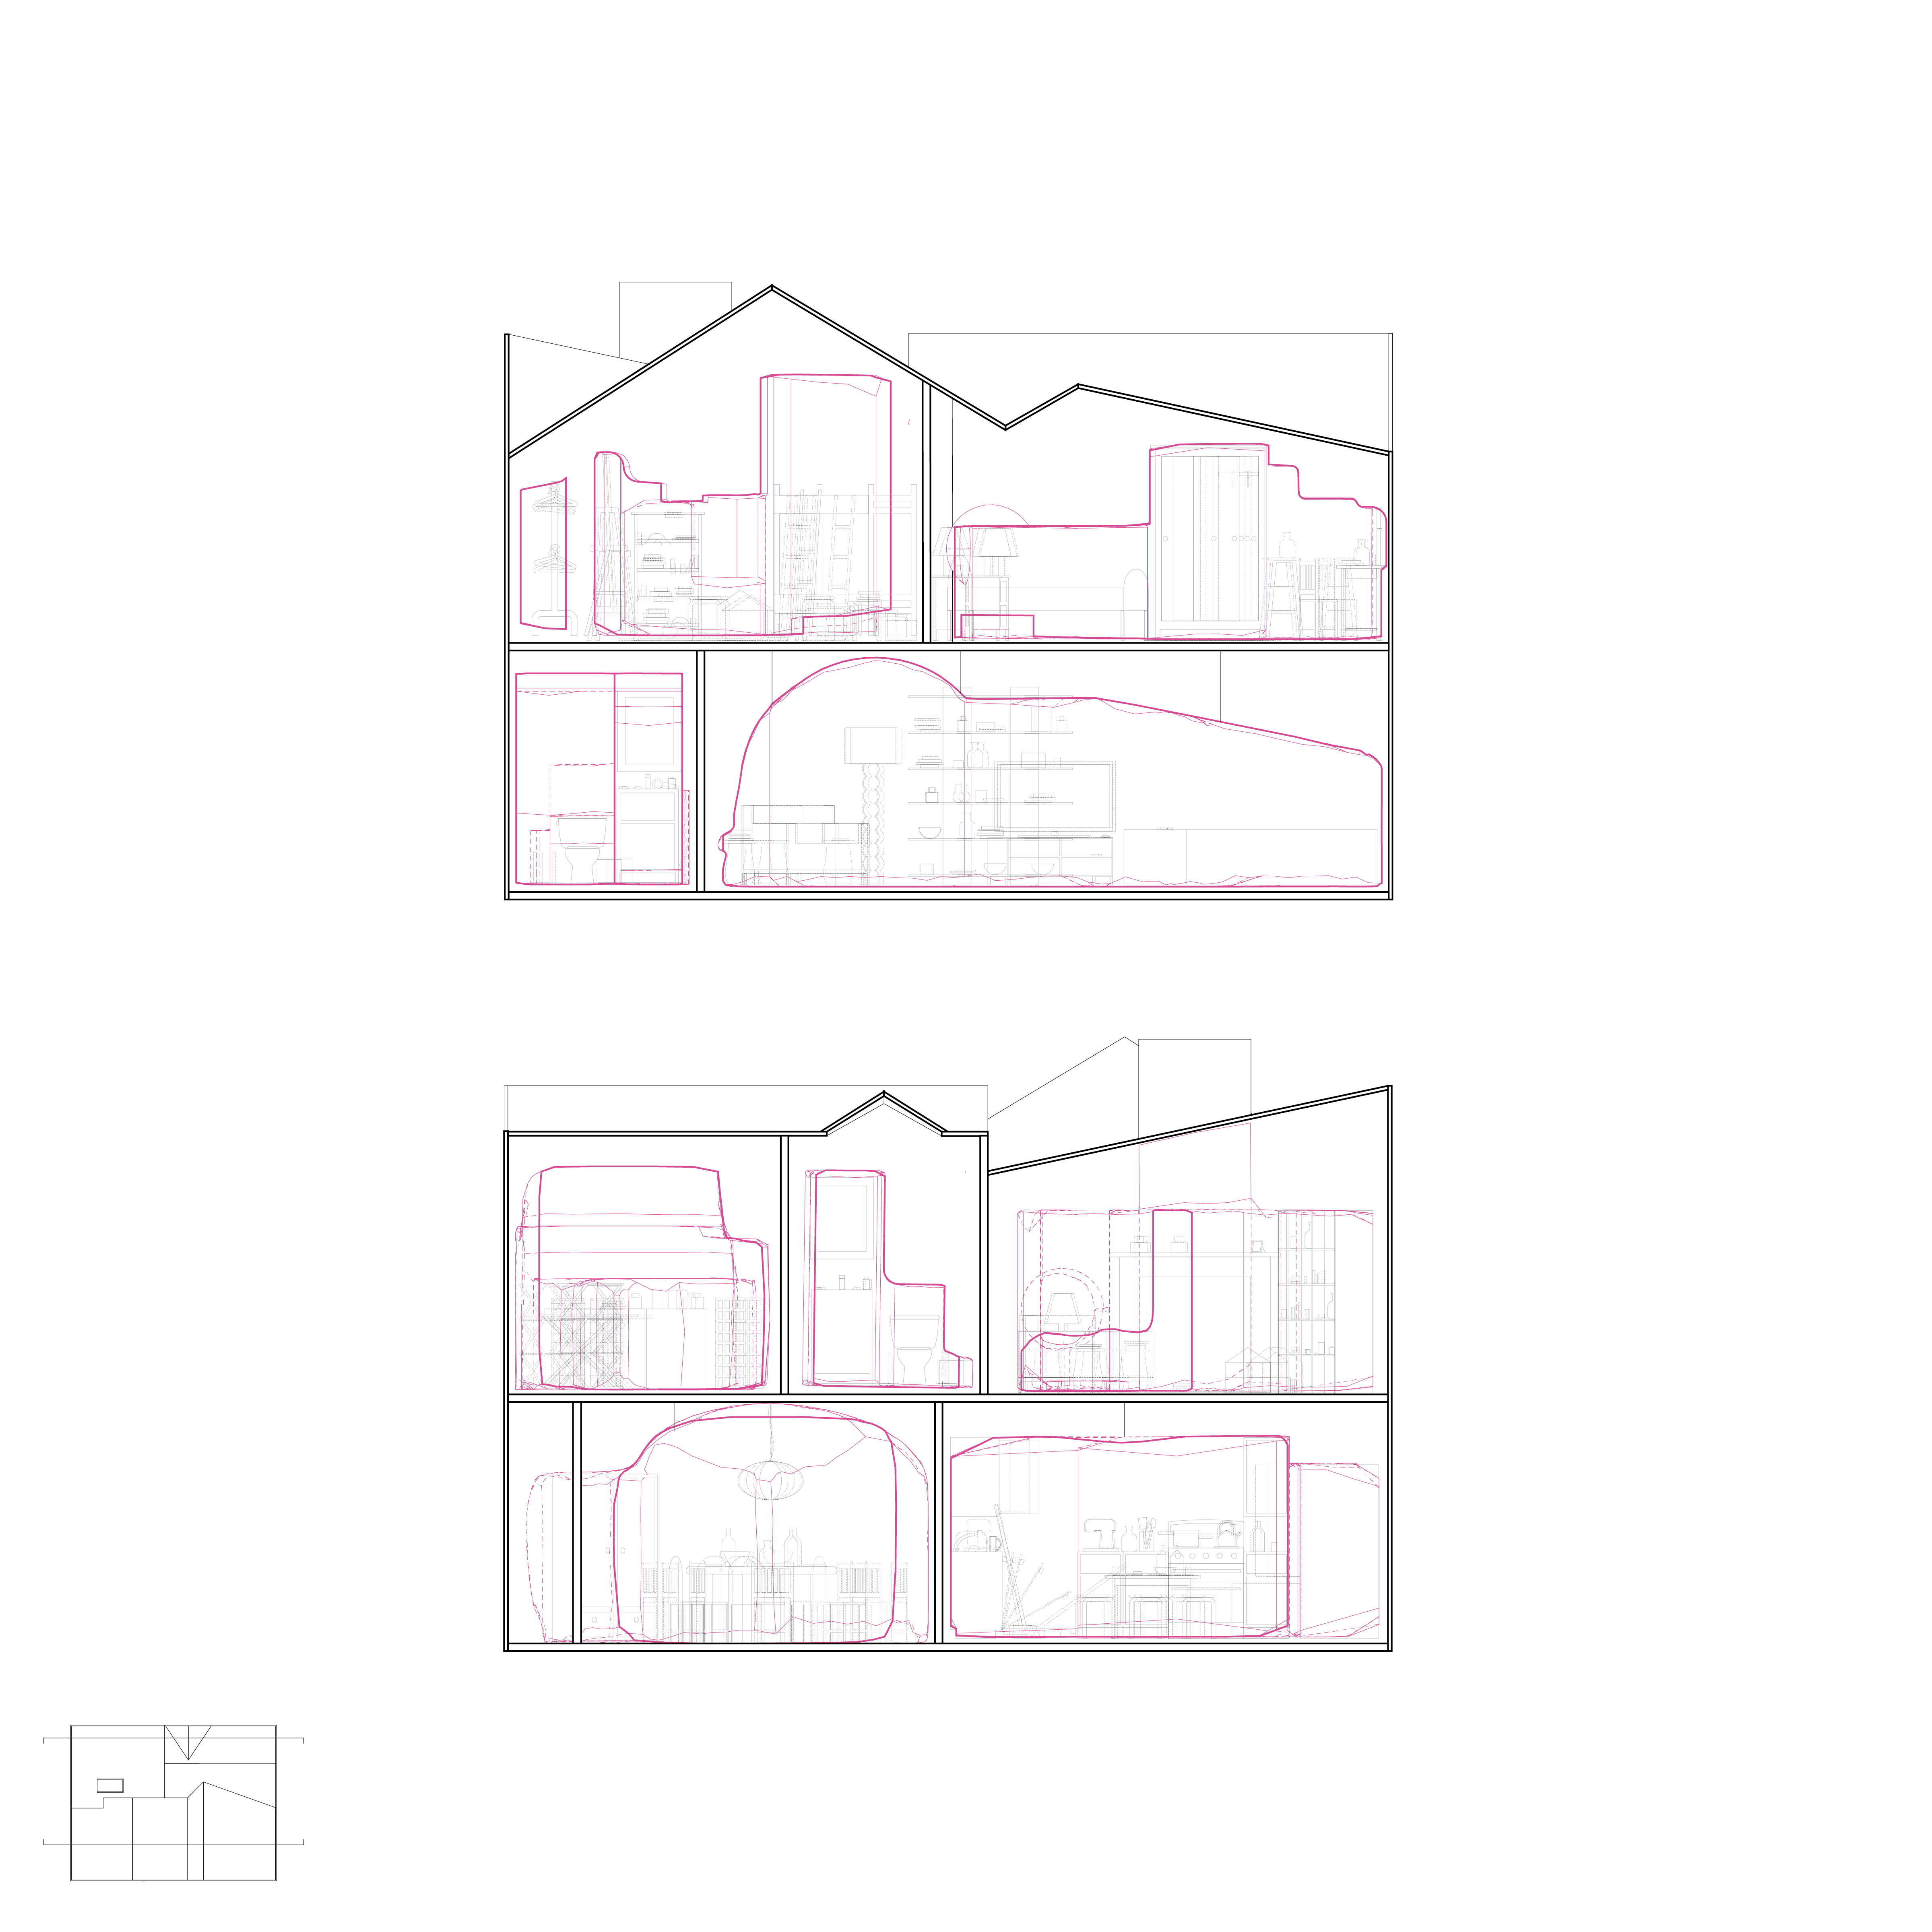 /Section%20drawing%20depicting%20the%20spaces%20the%20objects%20create%20slotted%20into%20a%20traditional-looking%20dollhouse%20form%2C%20contrasting%20the%20two%20different%20understandings%20of%20space%20making.